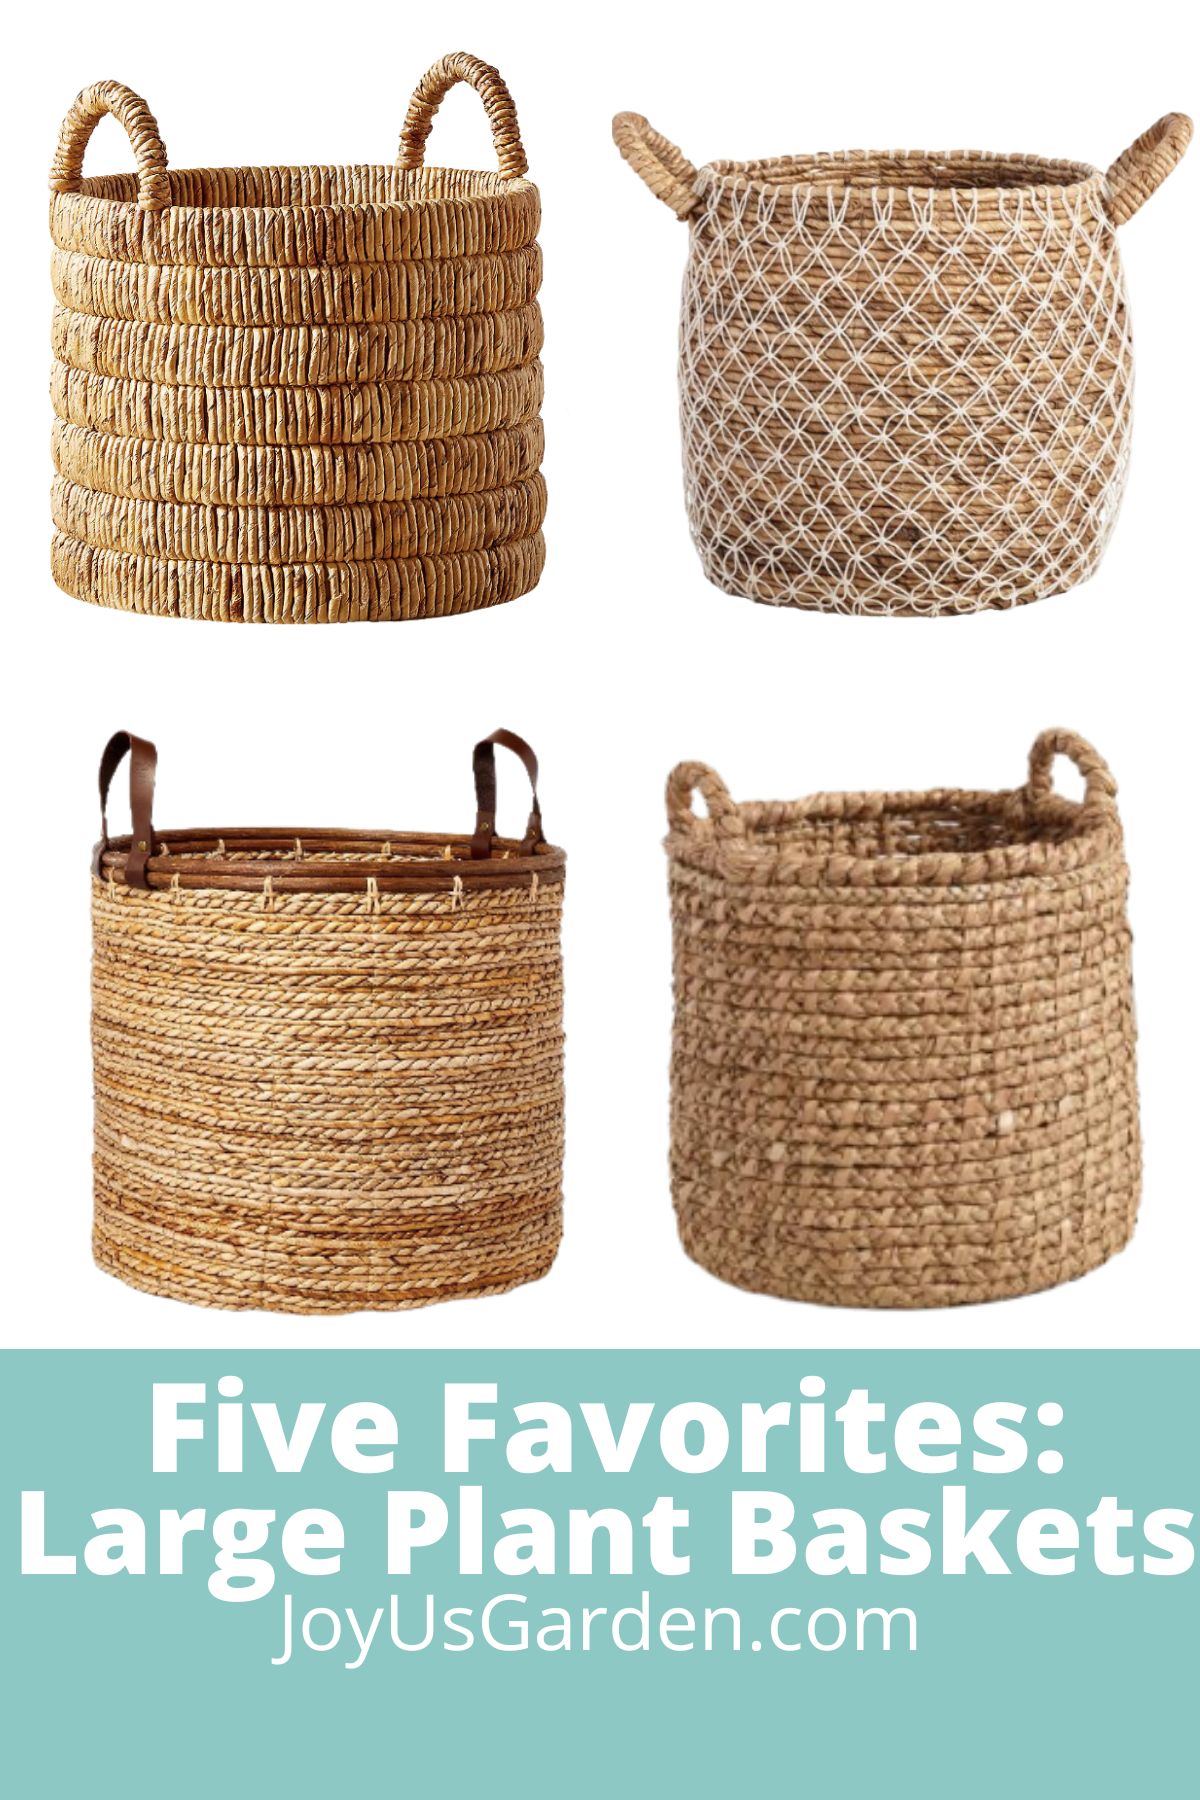 a collage of 4 large plant baskets with handles the text reads five favorites large plant baskets joyusgarden.com